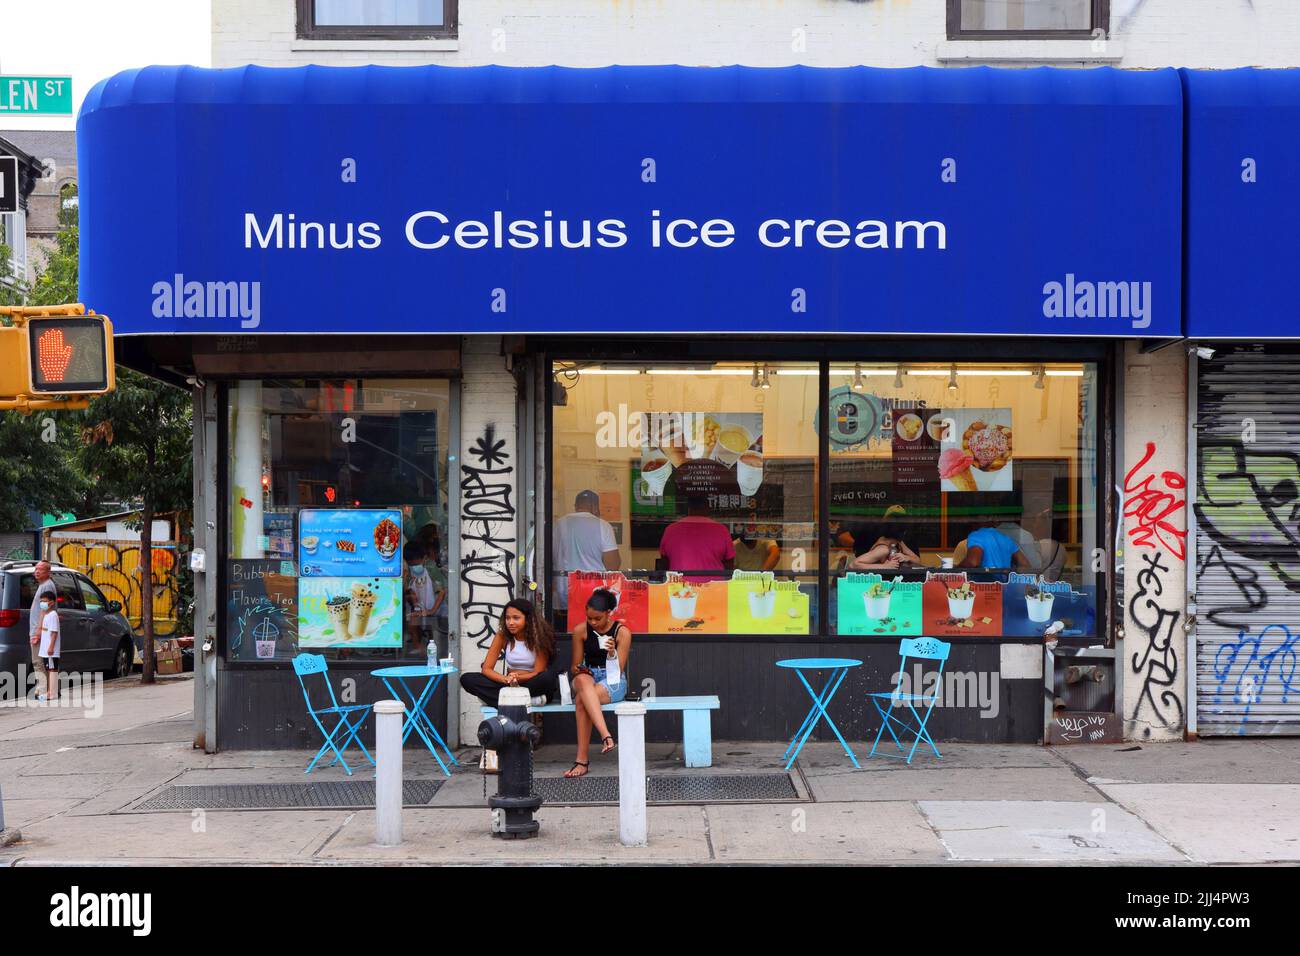 Minus Celsius Ice Cream, 302 Grand St, New York, NYC storefront photo of a rolled ice cream shop in Manhattan's Lower East Side, Chinatown. Stock Photo